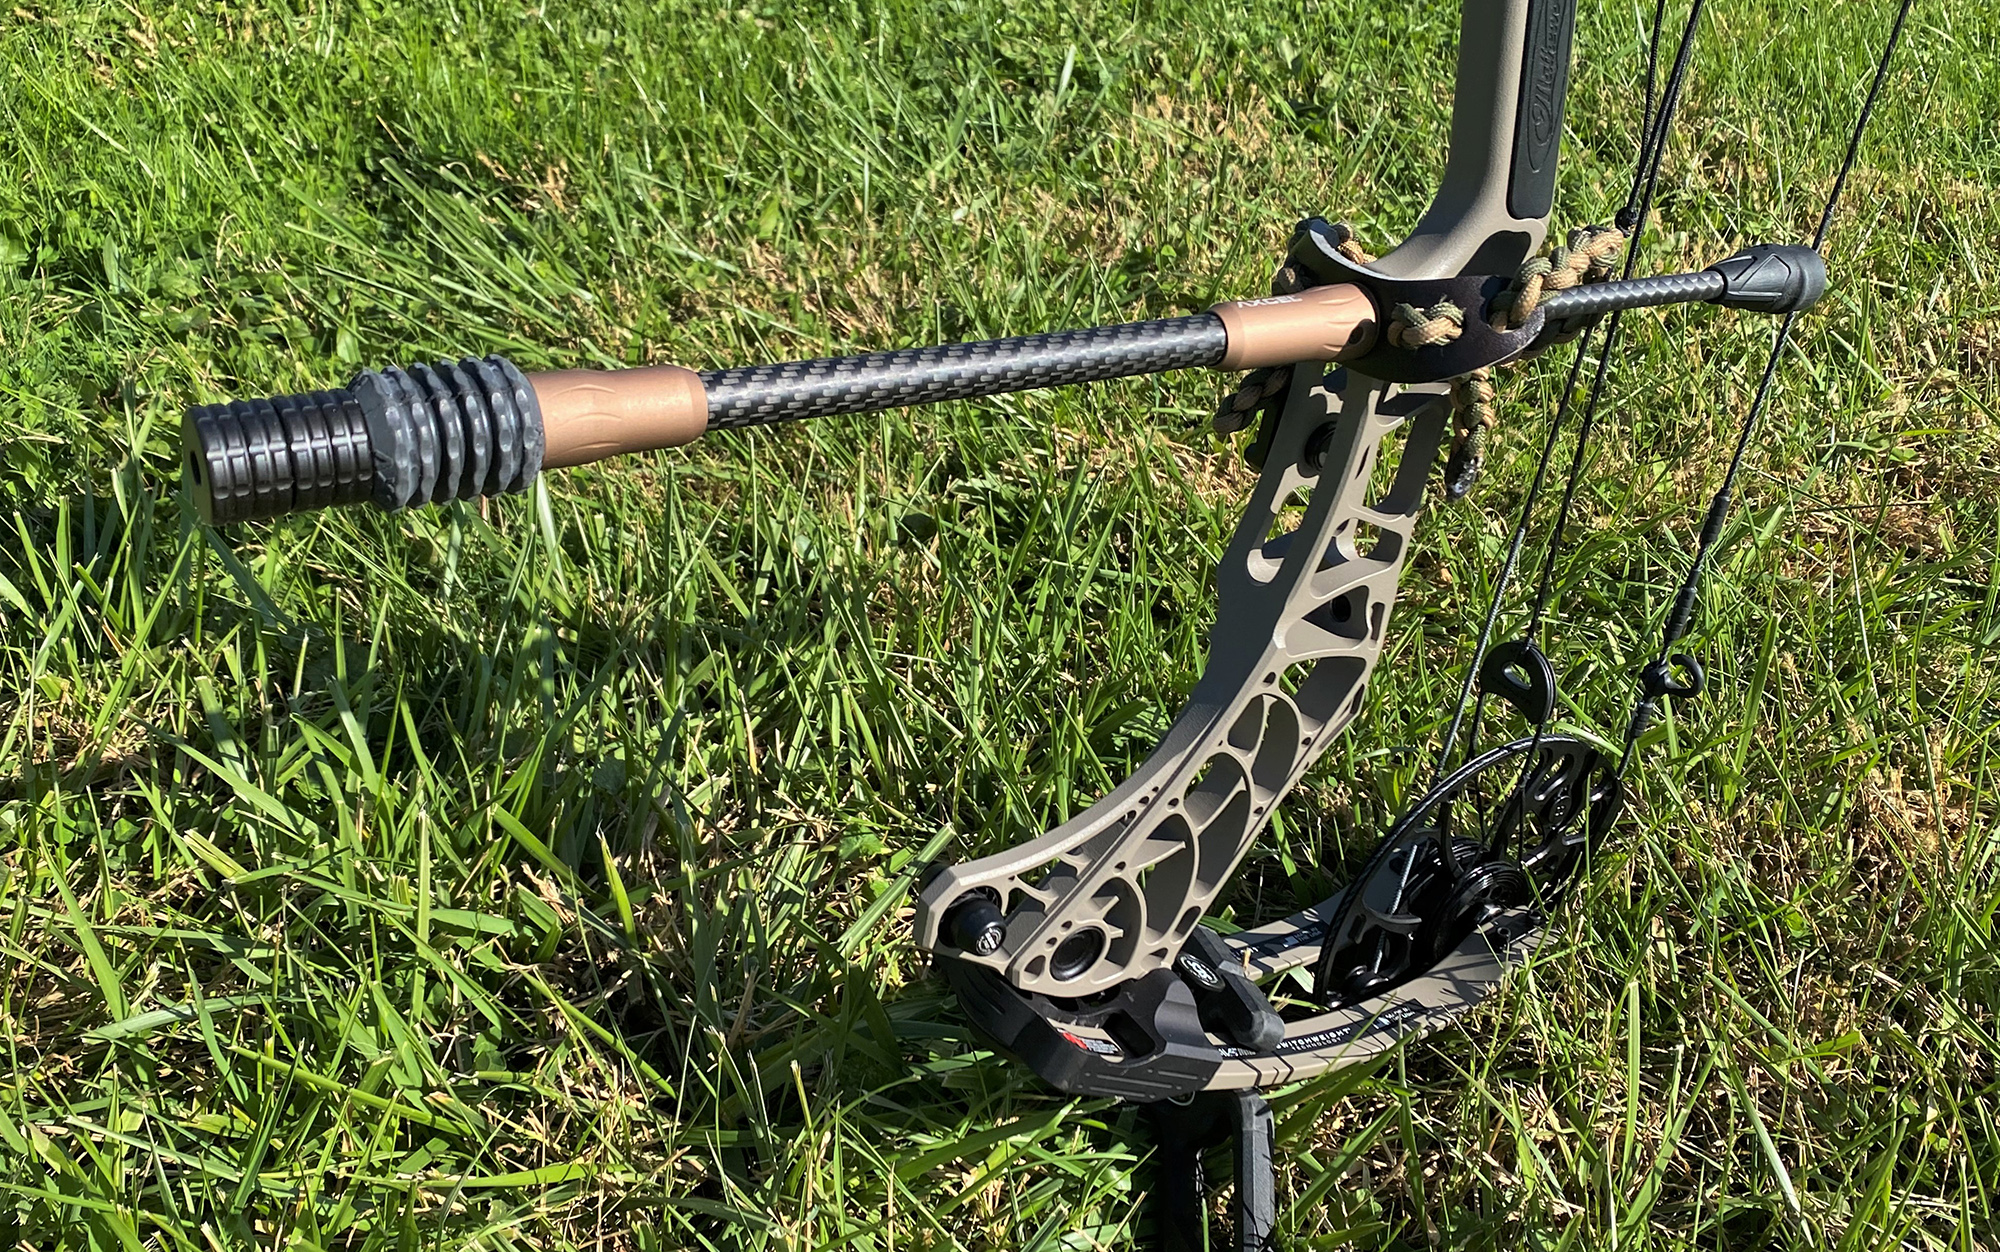 Ten inches is a length most bowhunters can work with.